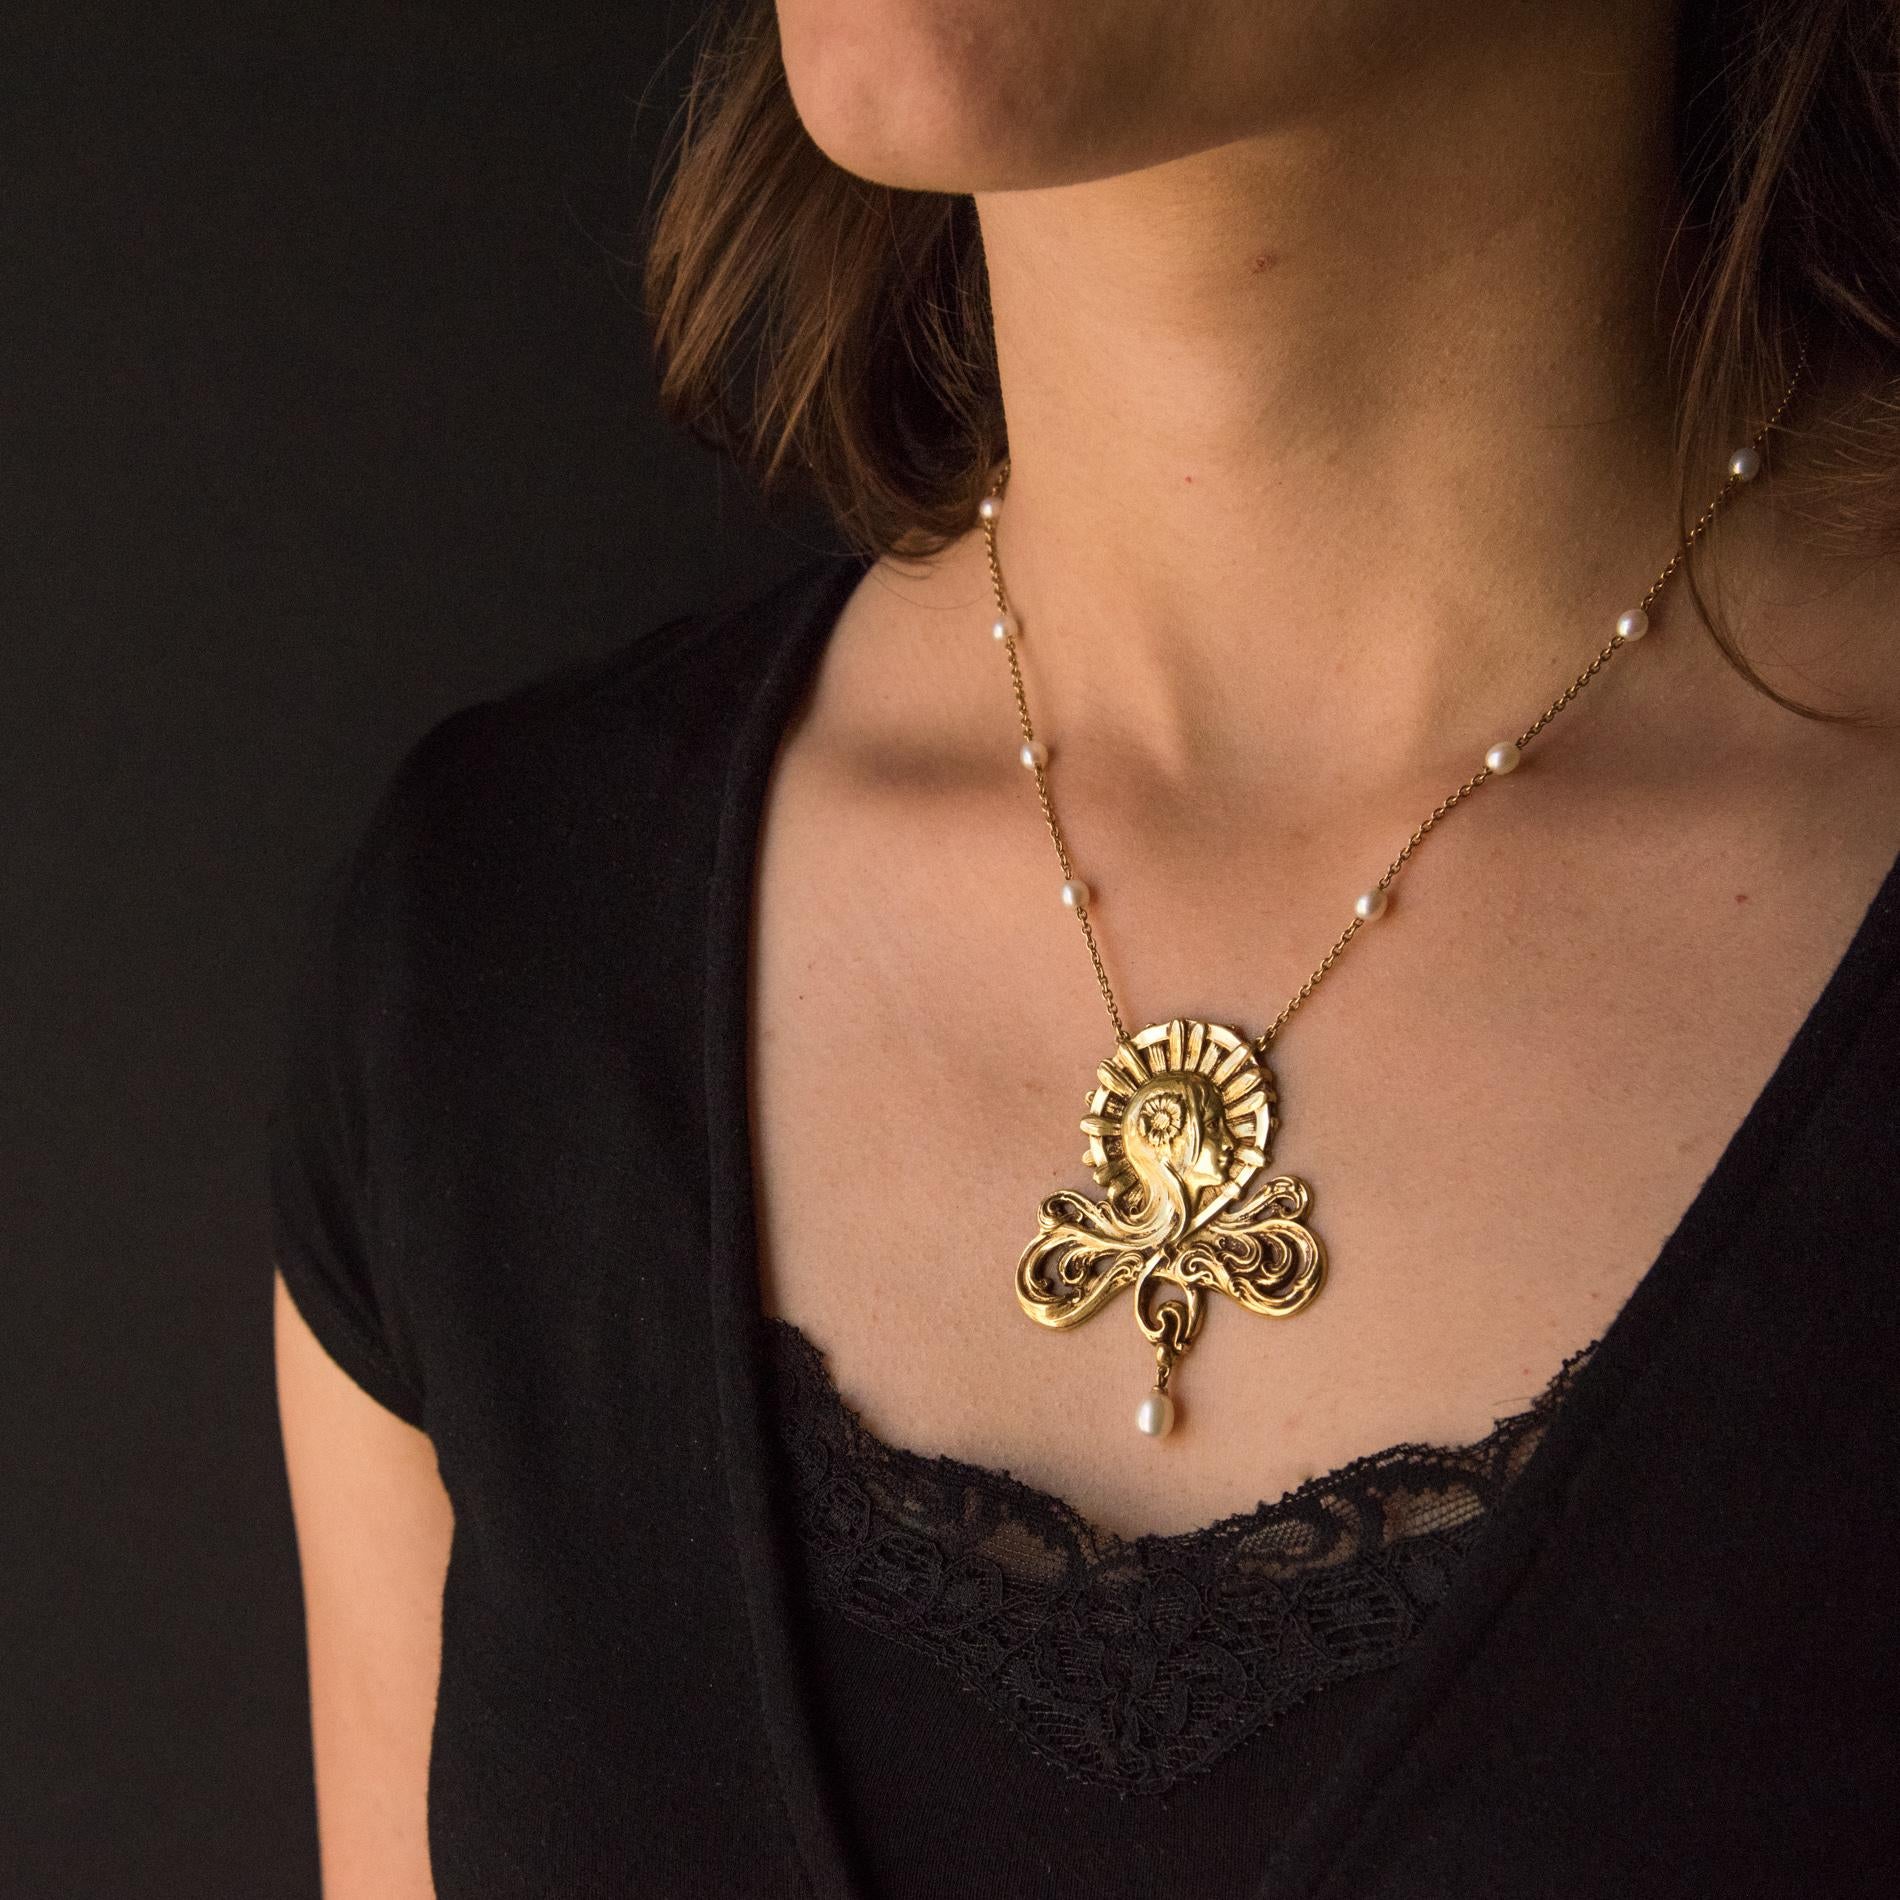 Baume creation - Unique piece.
Necklace in 18 carat yellow gold, eagle head hallmark. 
Featuring a woman’s head, her hair blends into an openwork design engraved beneath. She wears a golden flower in her hair. The design is completed with an